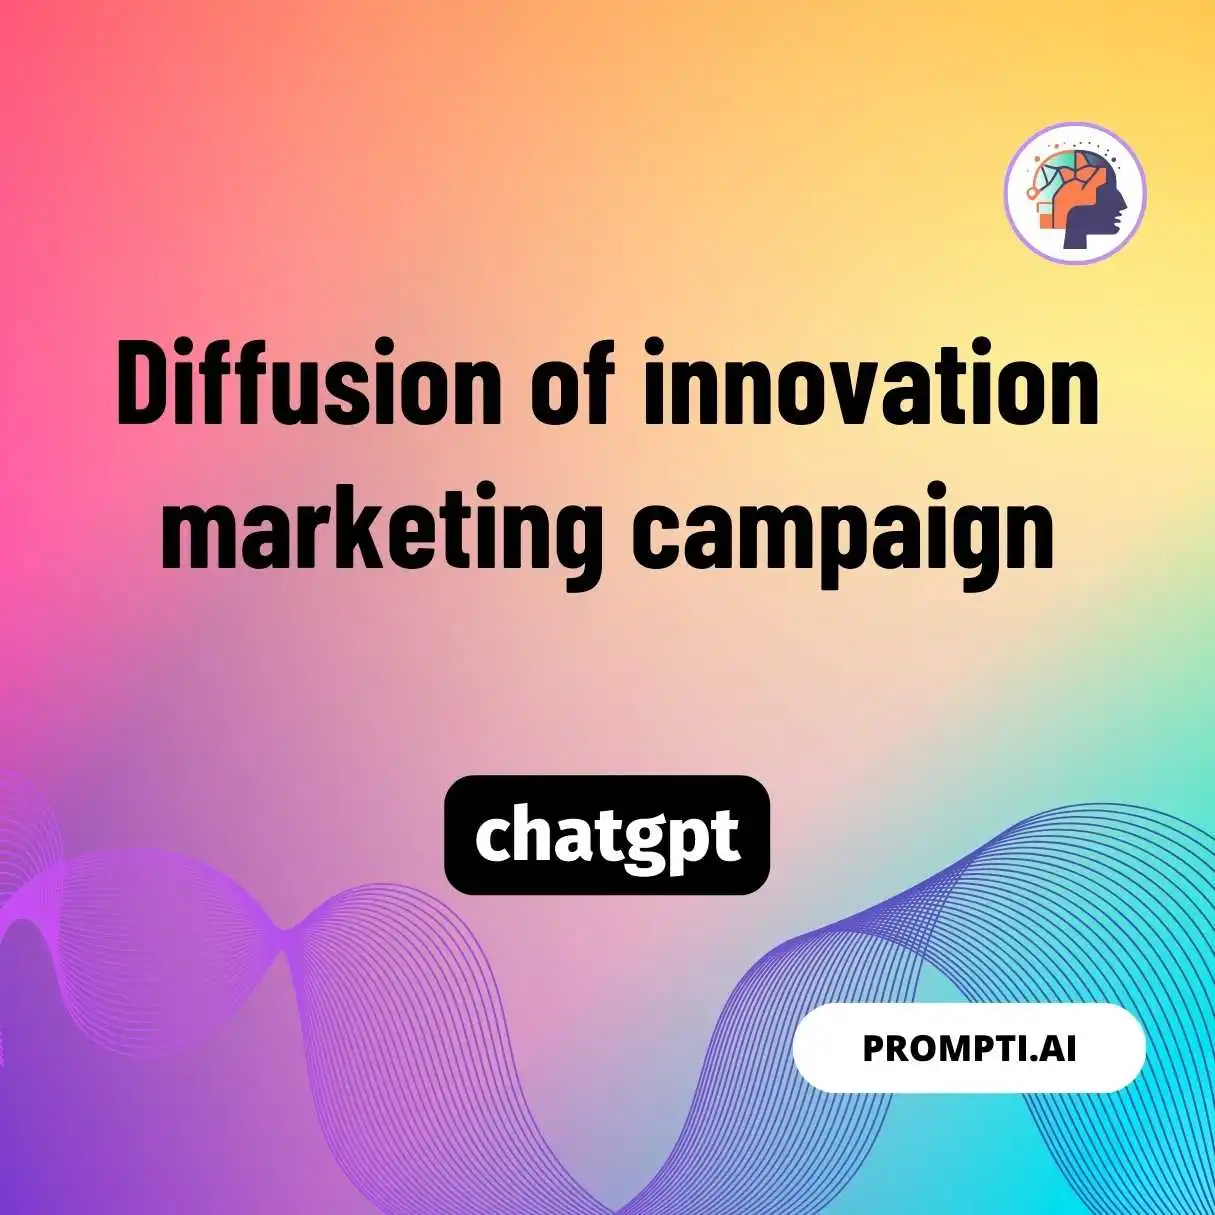 Diffusion of innovation marketing campaign